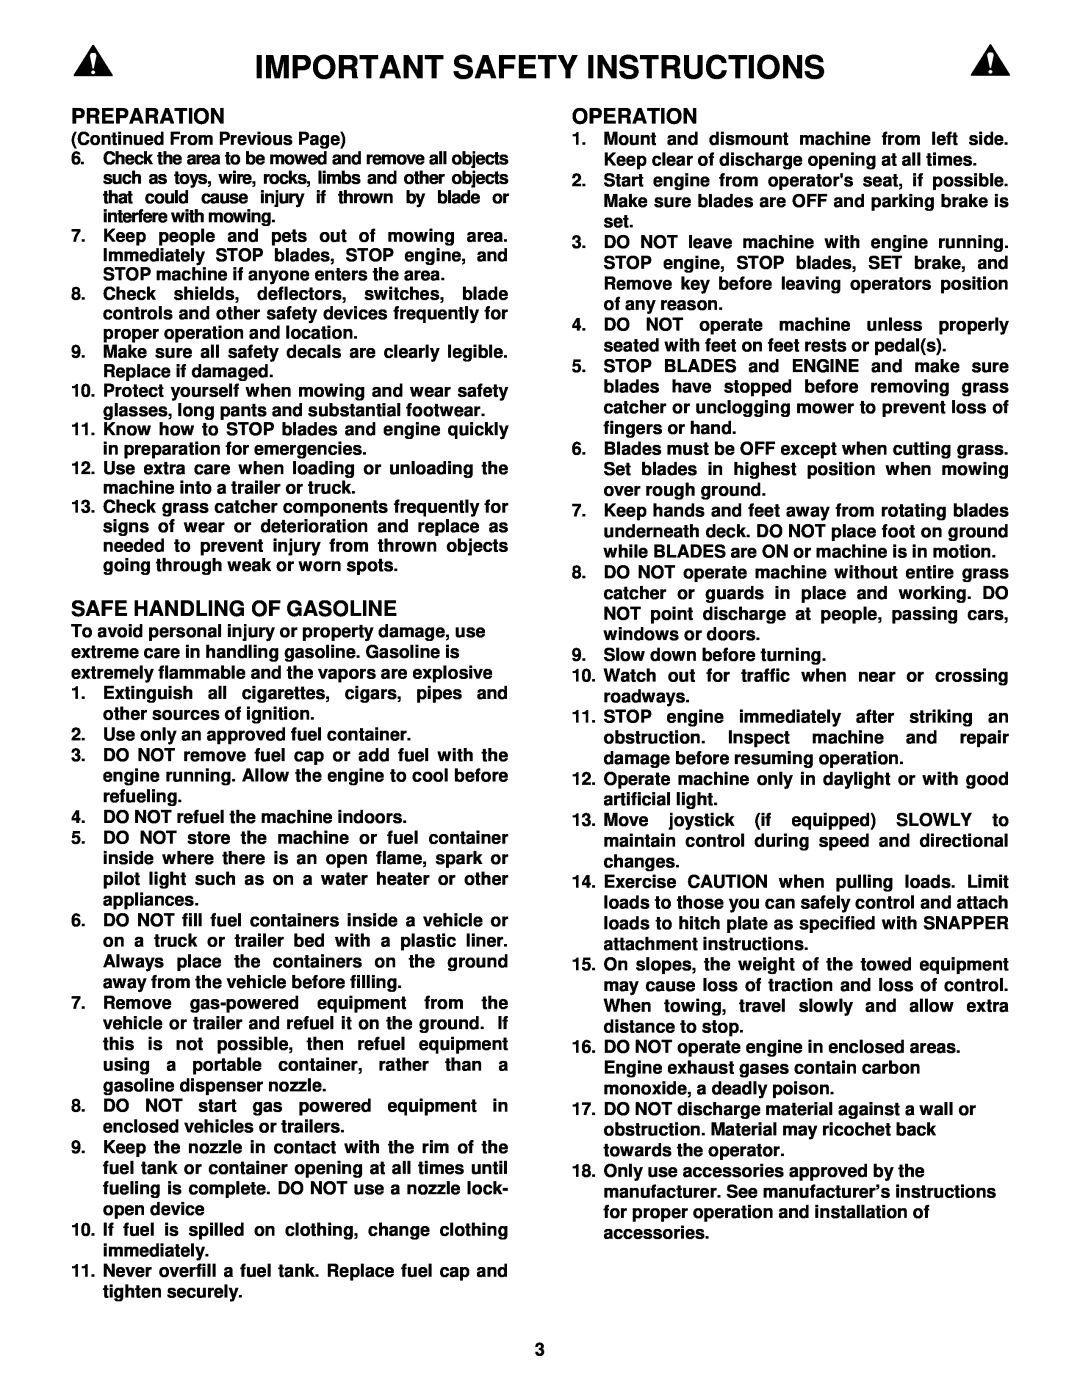 Snapper Important Safety Instructions, Preparation, Safe Handling Of Gasoline, Operation, Continued From Previous Page 